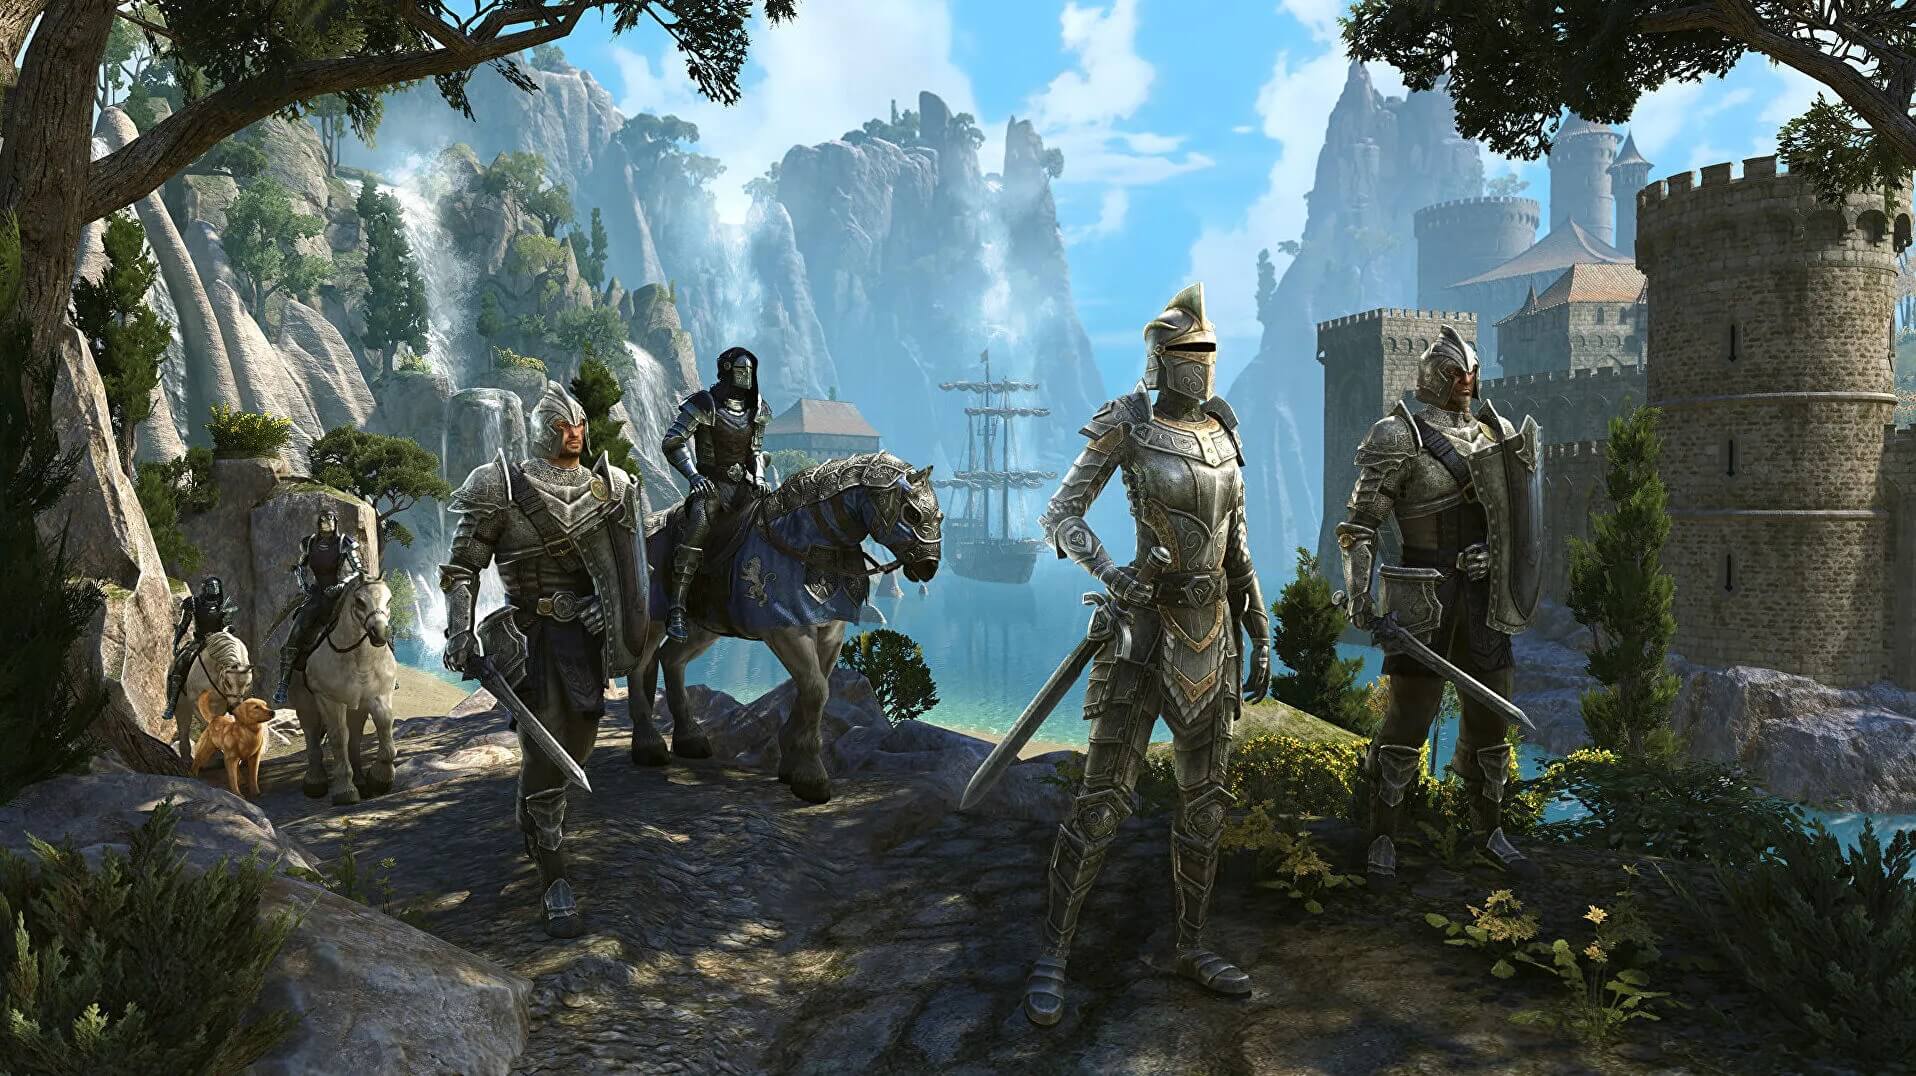 The Elder Scrolls online as an example of a popular rpg game